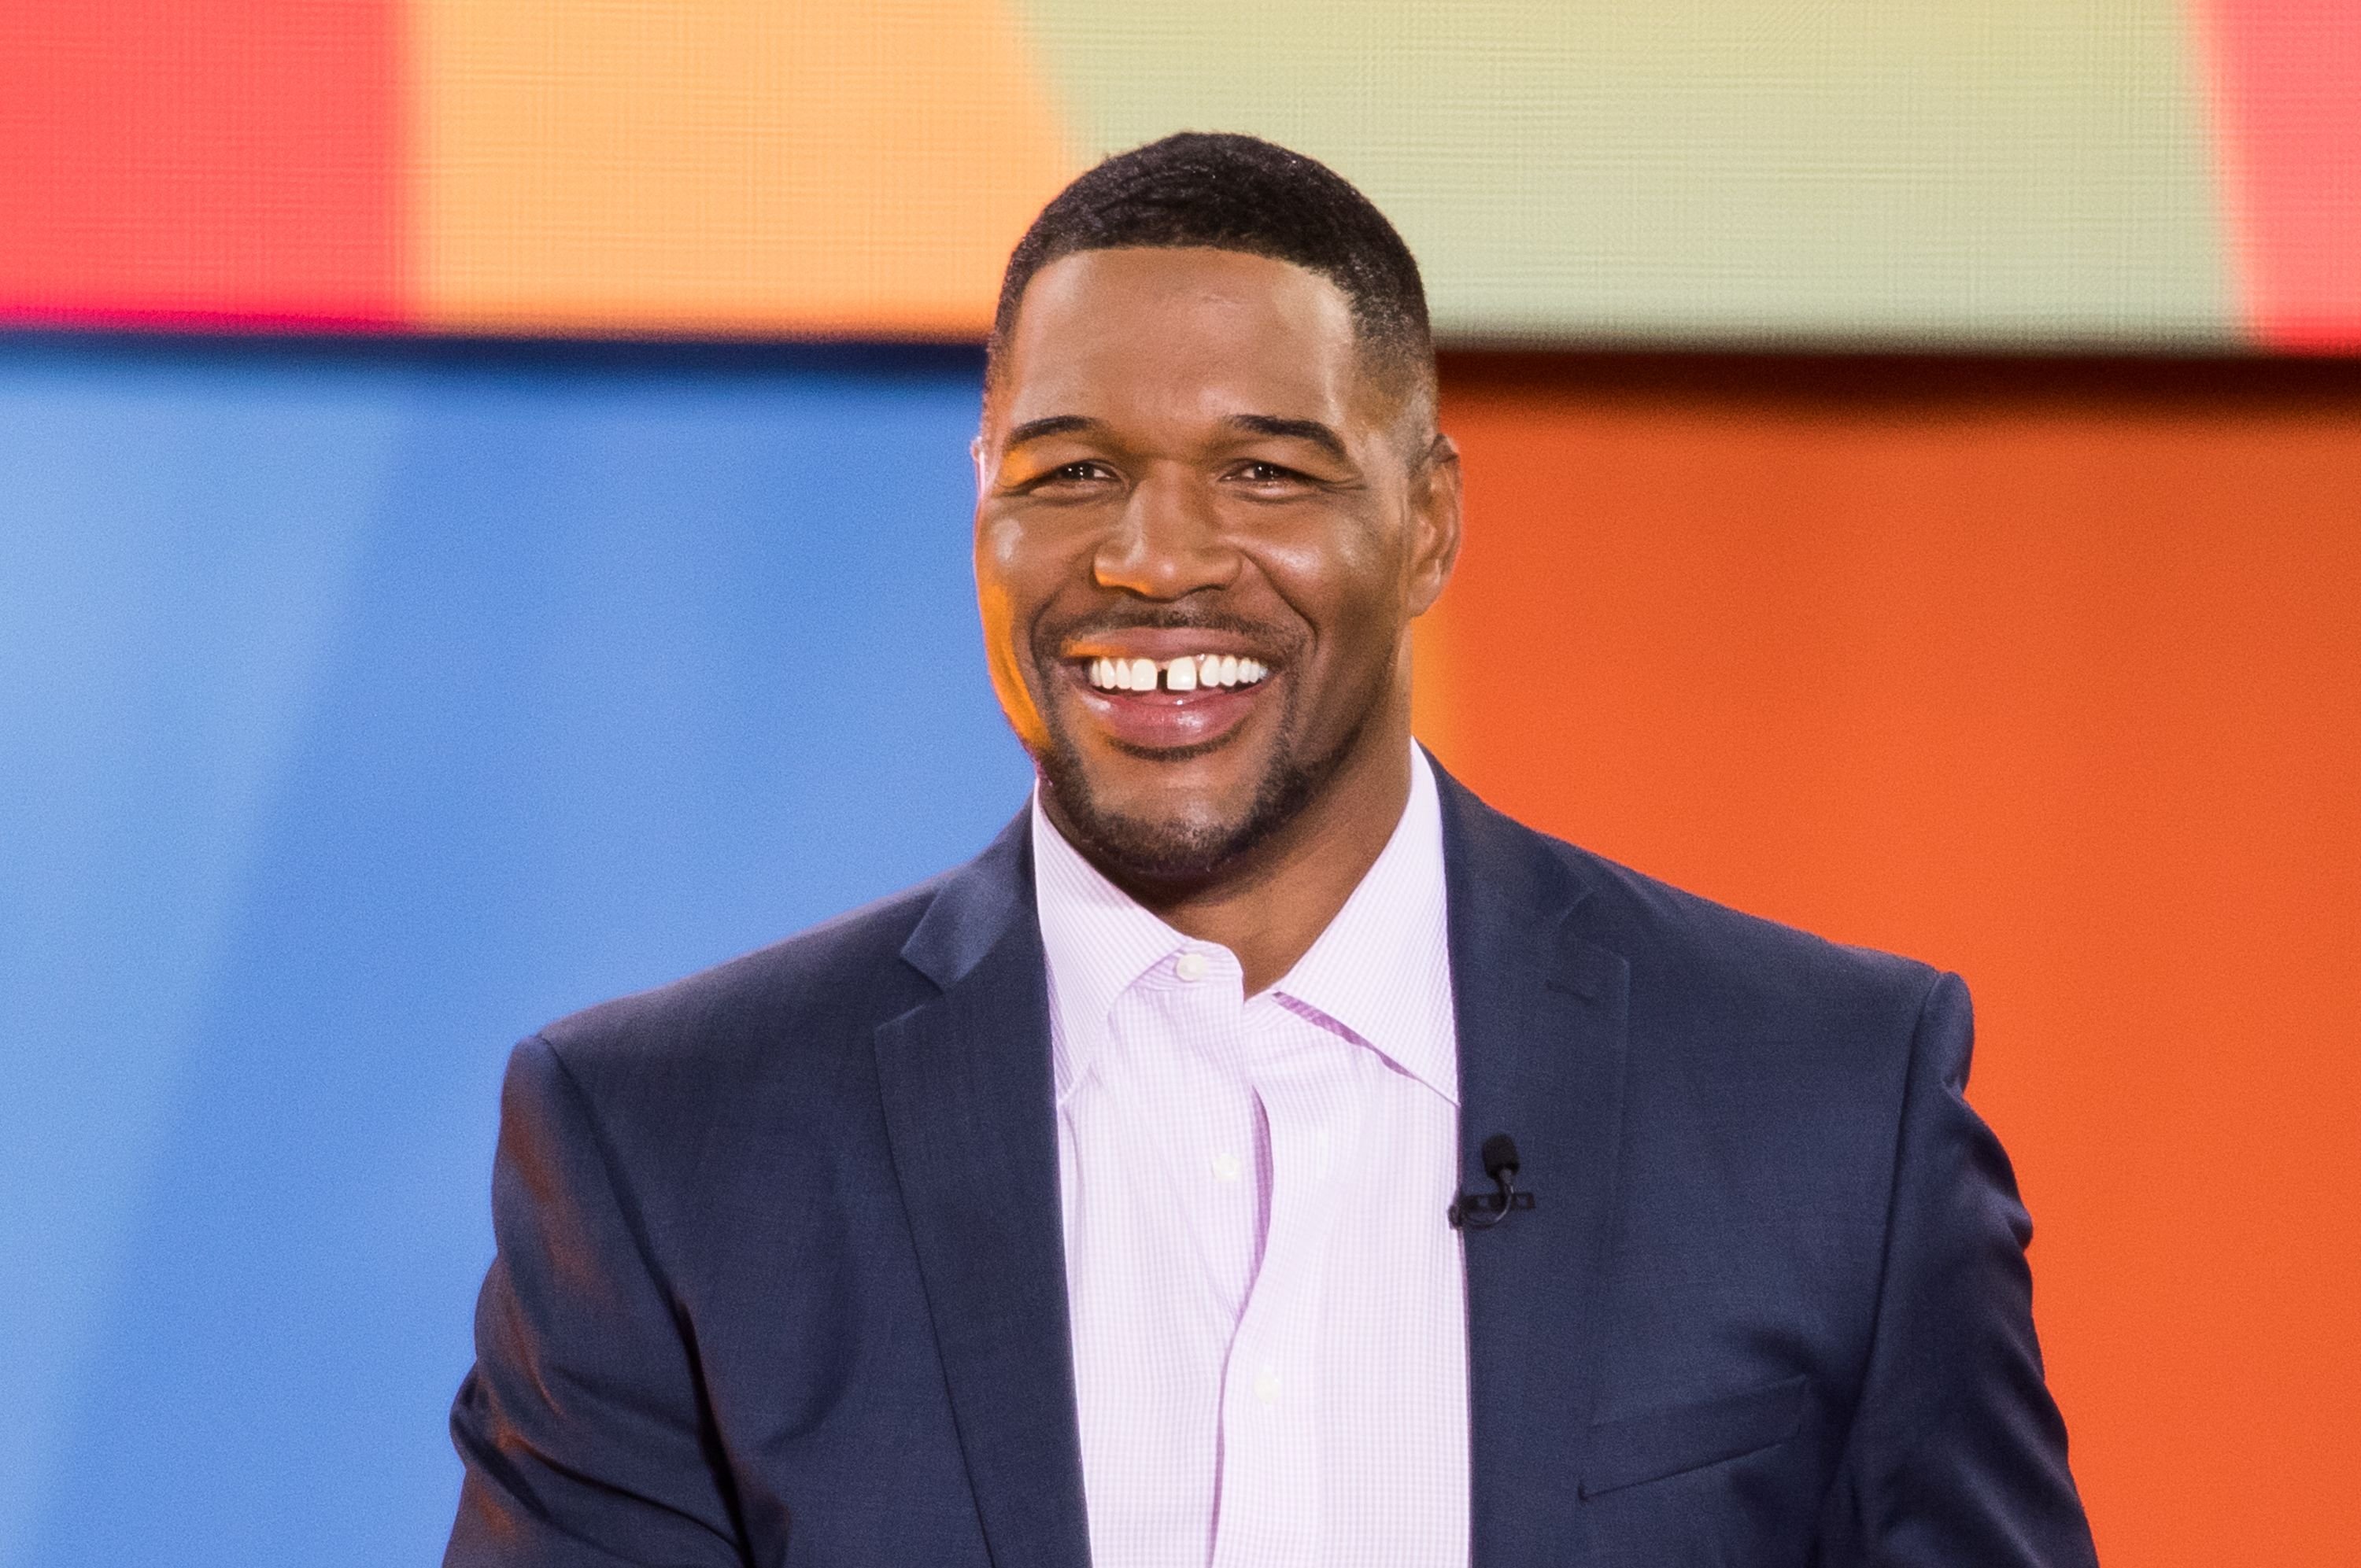 Michael Strahan at ABC's "Good Morning America" at Rumsey Playfield, Central Park on July 6, 2018. | Photo: Getty Images